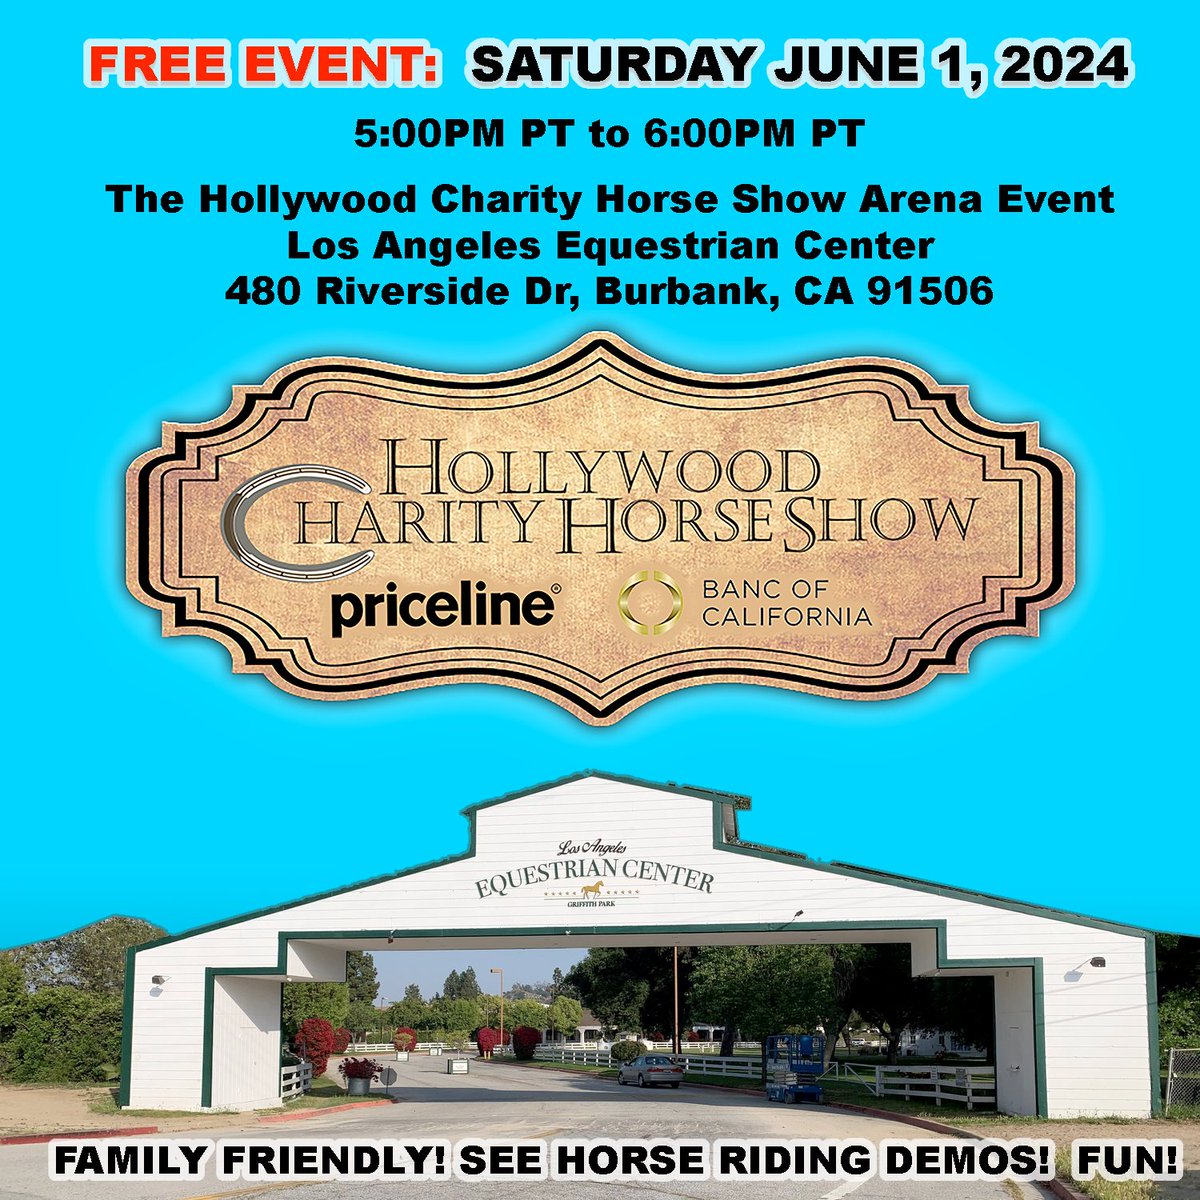 SoCal residents! The FREE Arena show which is part of my #HollywoodCharityHorseShow is happening on 6/1/24 at 5PM PT at the @LAequestCenter in Burbank. I will be hosting from the arena. Bring Grandma, mean Aunt Bertha or your Mother in Law! They ❤️ me as much as I ❤️ me! 🤣 👇🏻